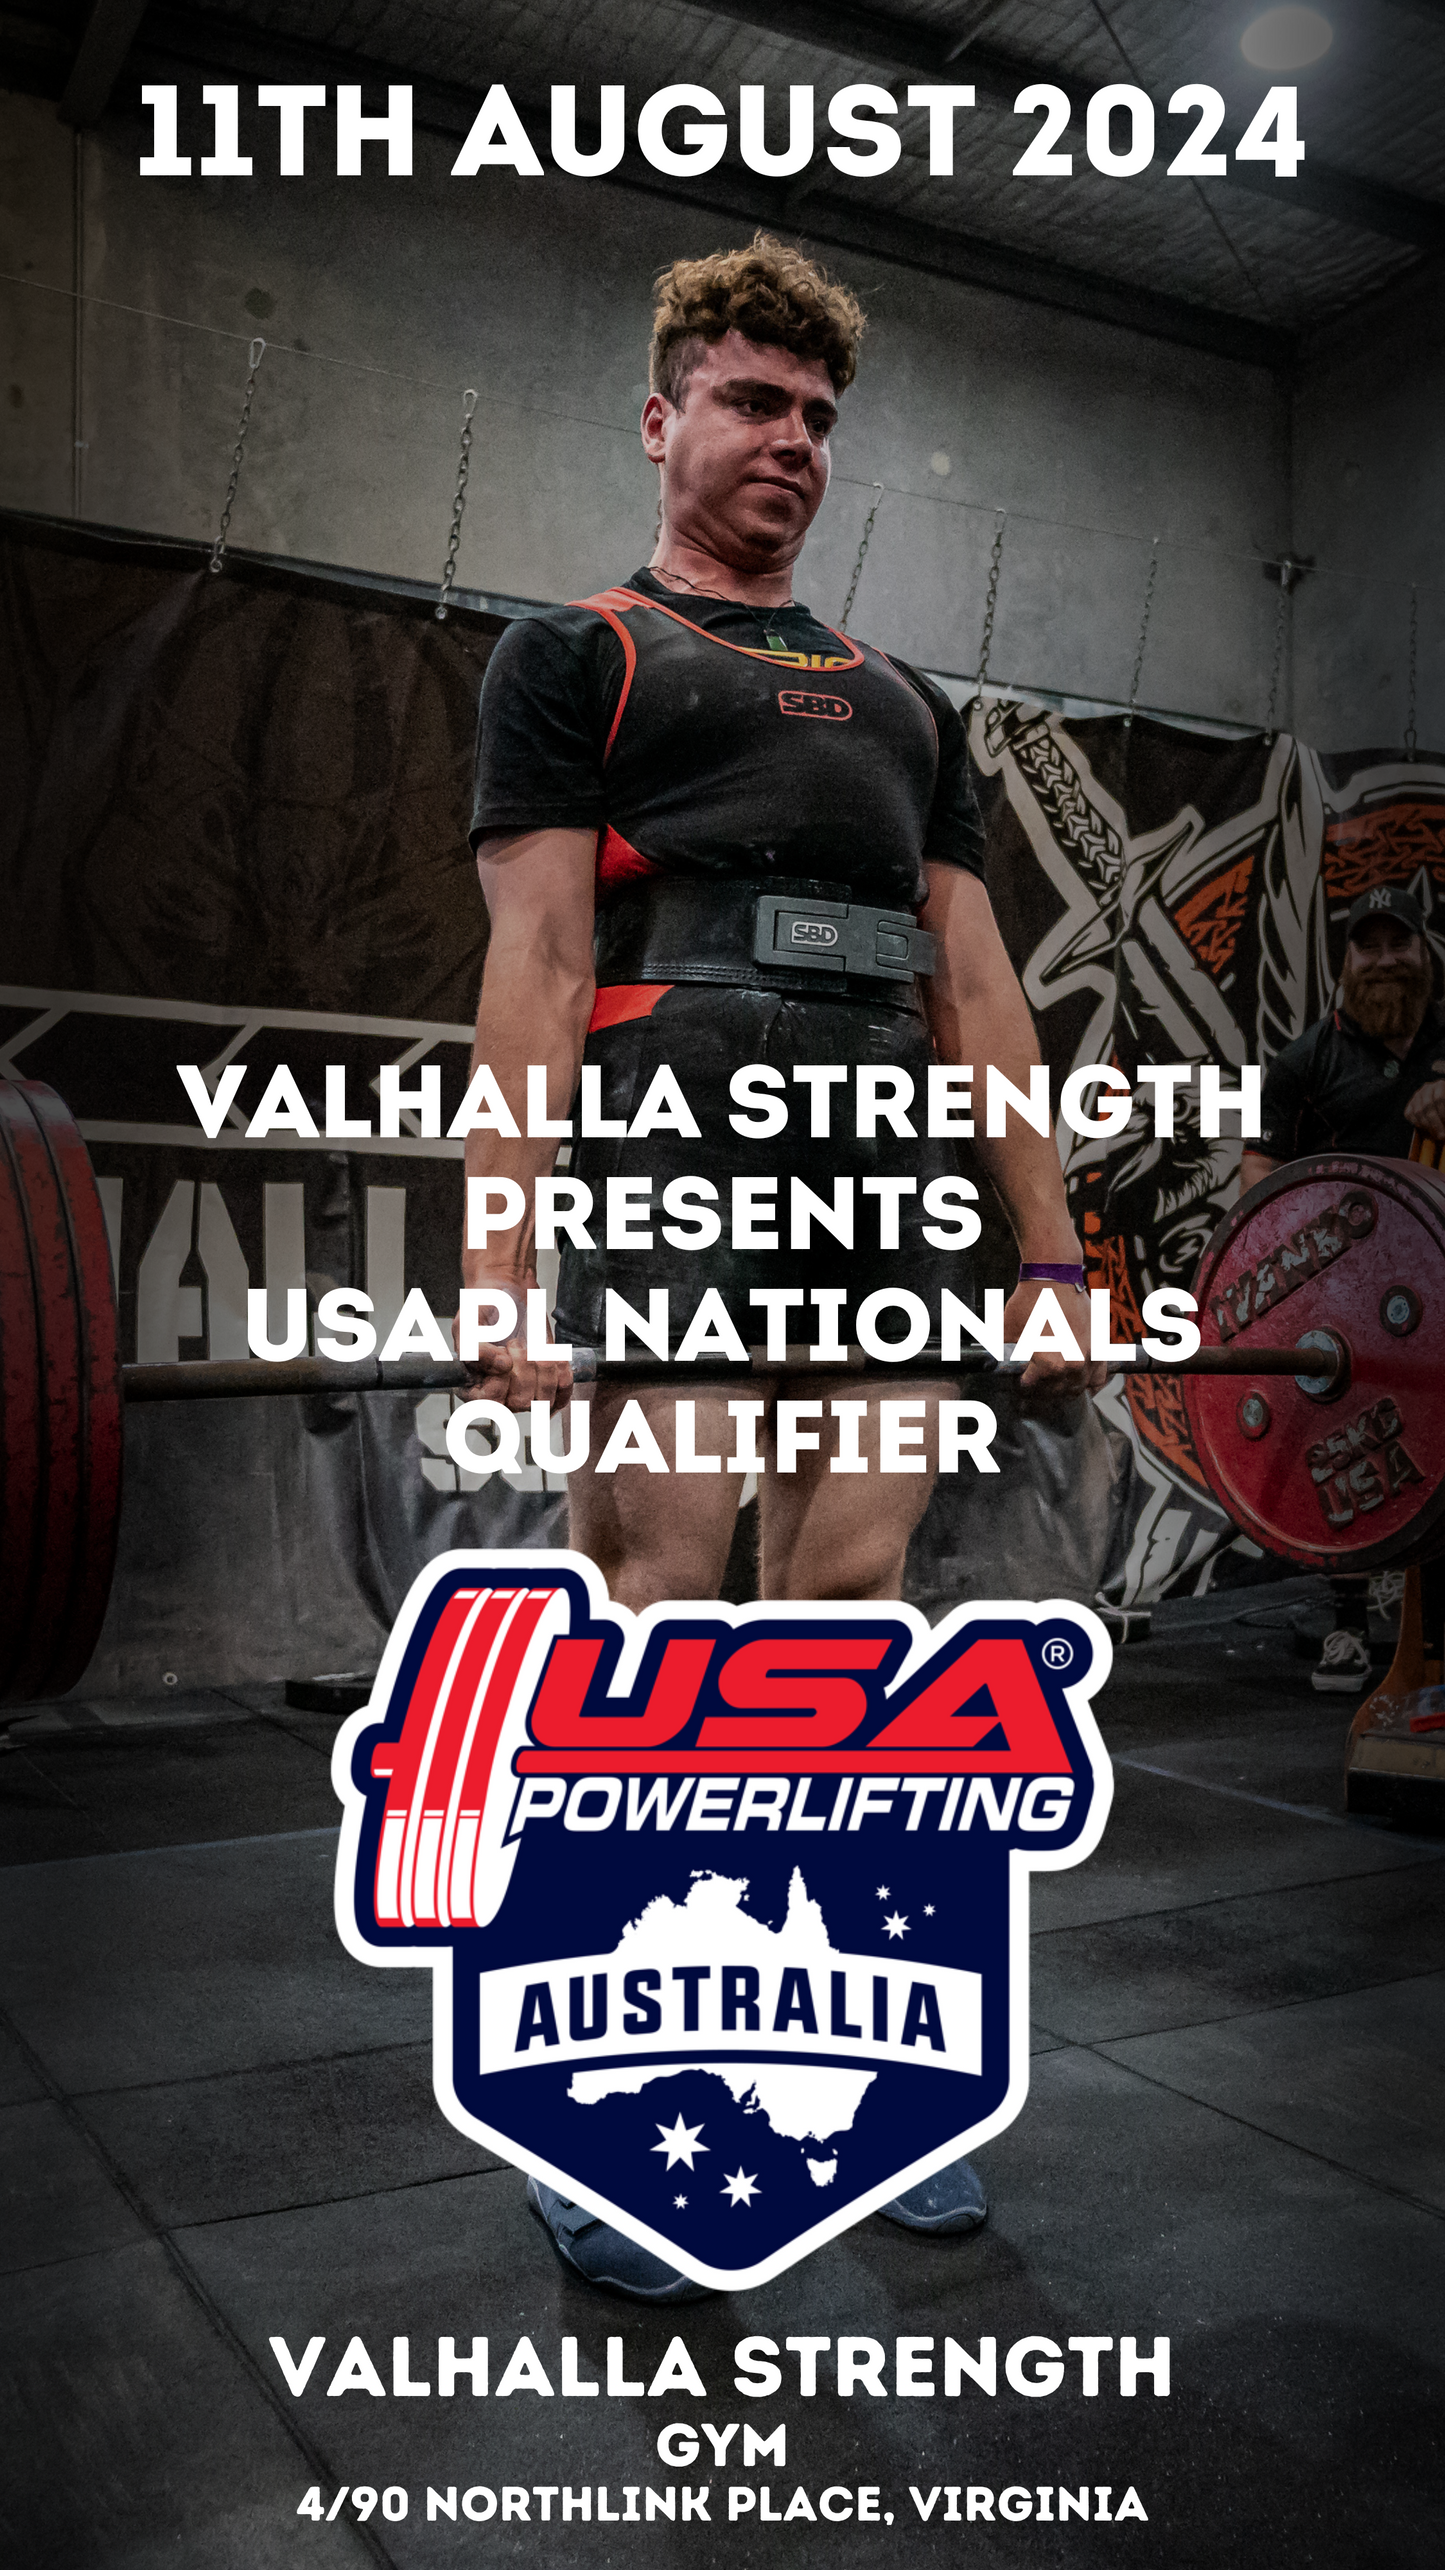 USAPL Nationals Qualifier -Please copy and paste URL in link below to purchase site.